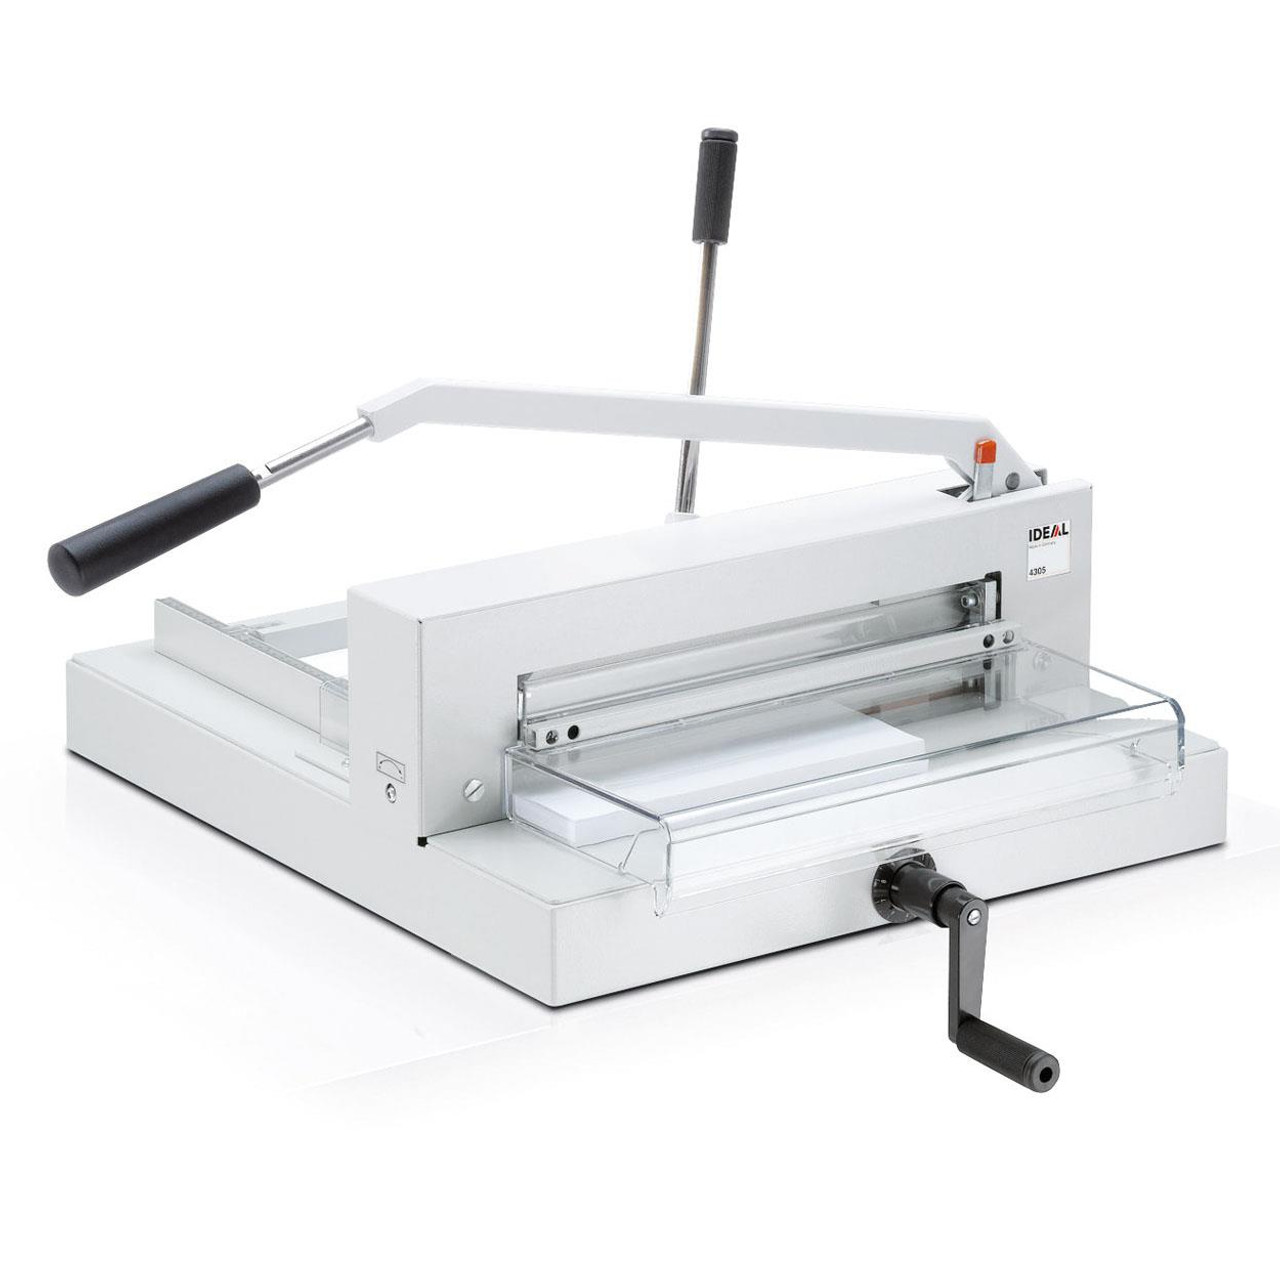 IDEAL 4305 Paper Guillotine